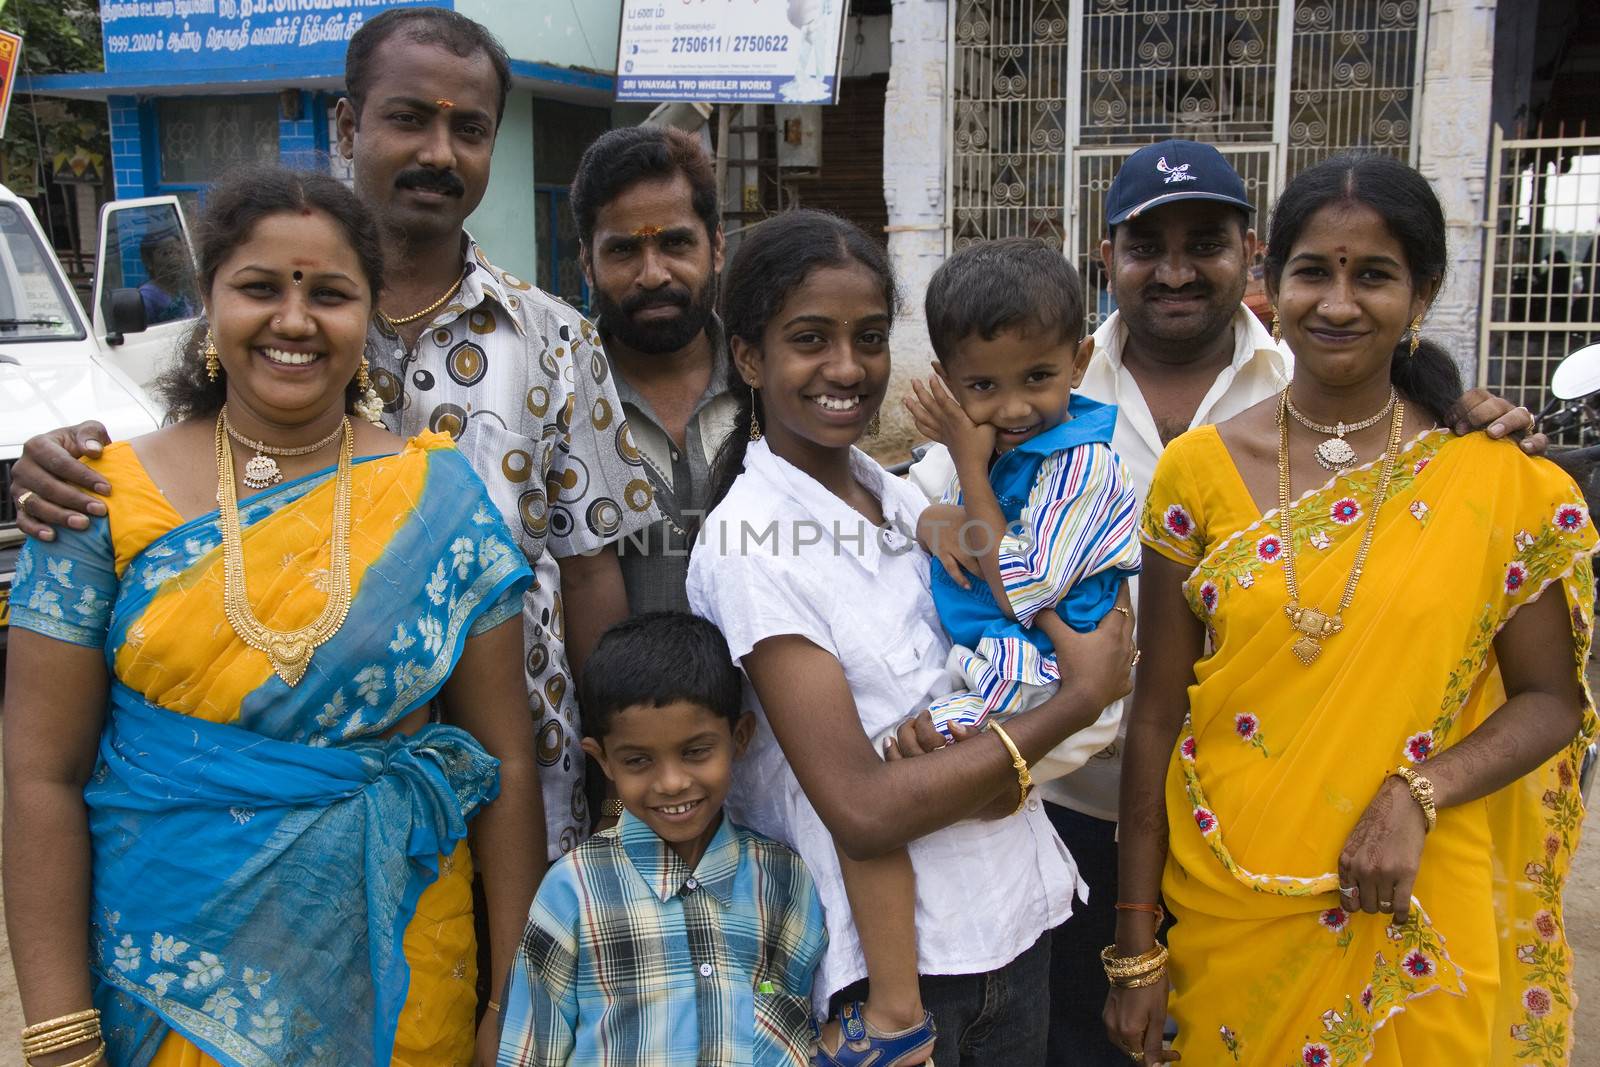 A family group in the town of Kandy on the island of Sri Lanka.